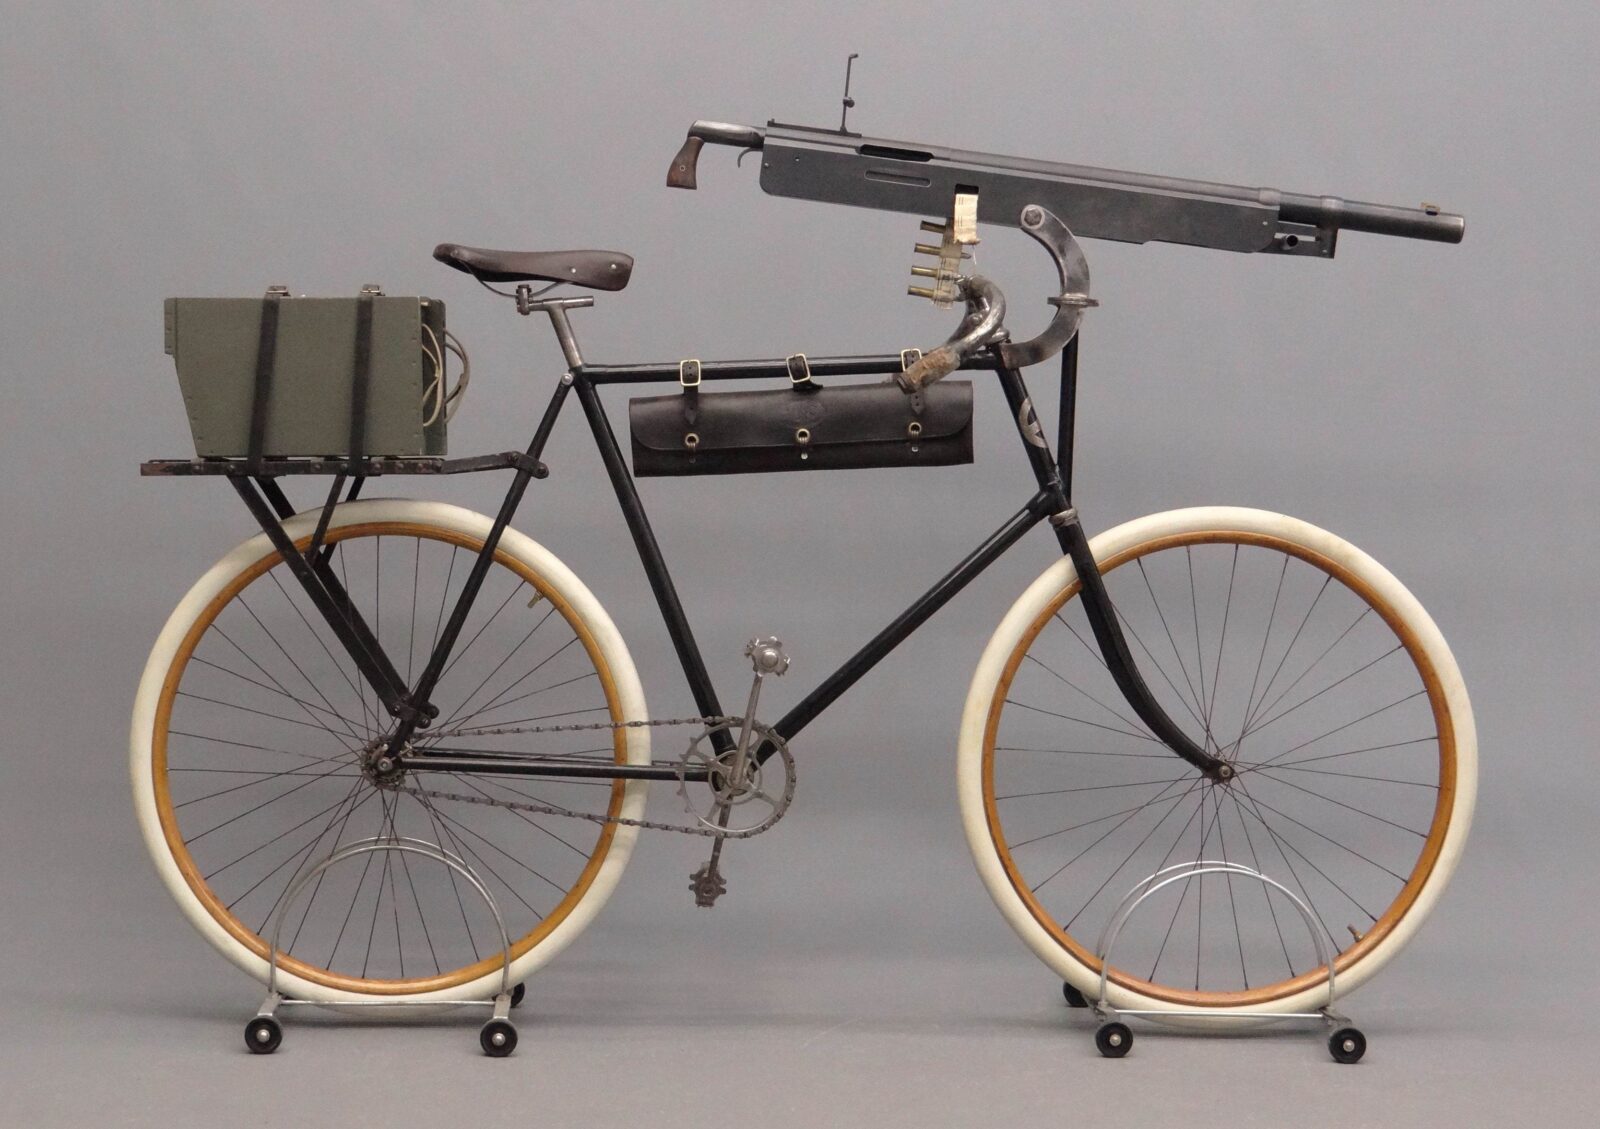 An 1897 Columbia Military Pneumatic Safety Bicycle (With A Machine Gun) - Columbia Military Pneumatic Safety Bicycle Machine Gun 1600x1129